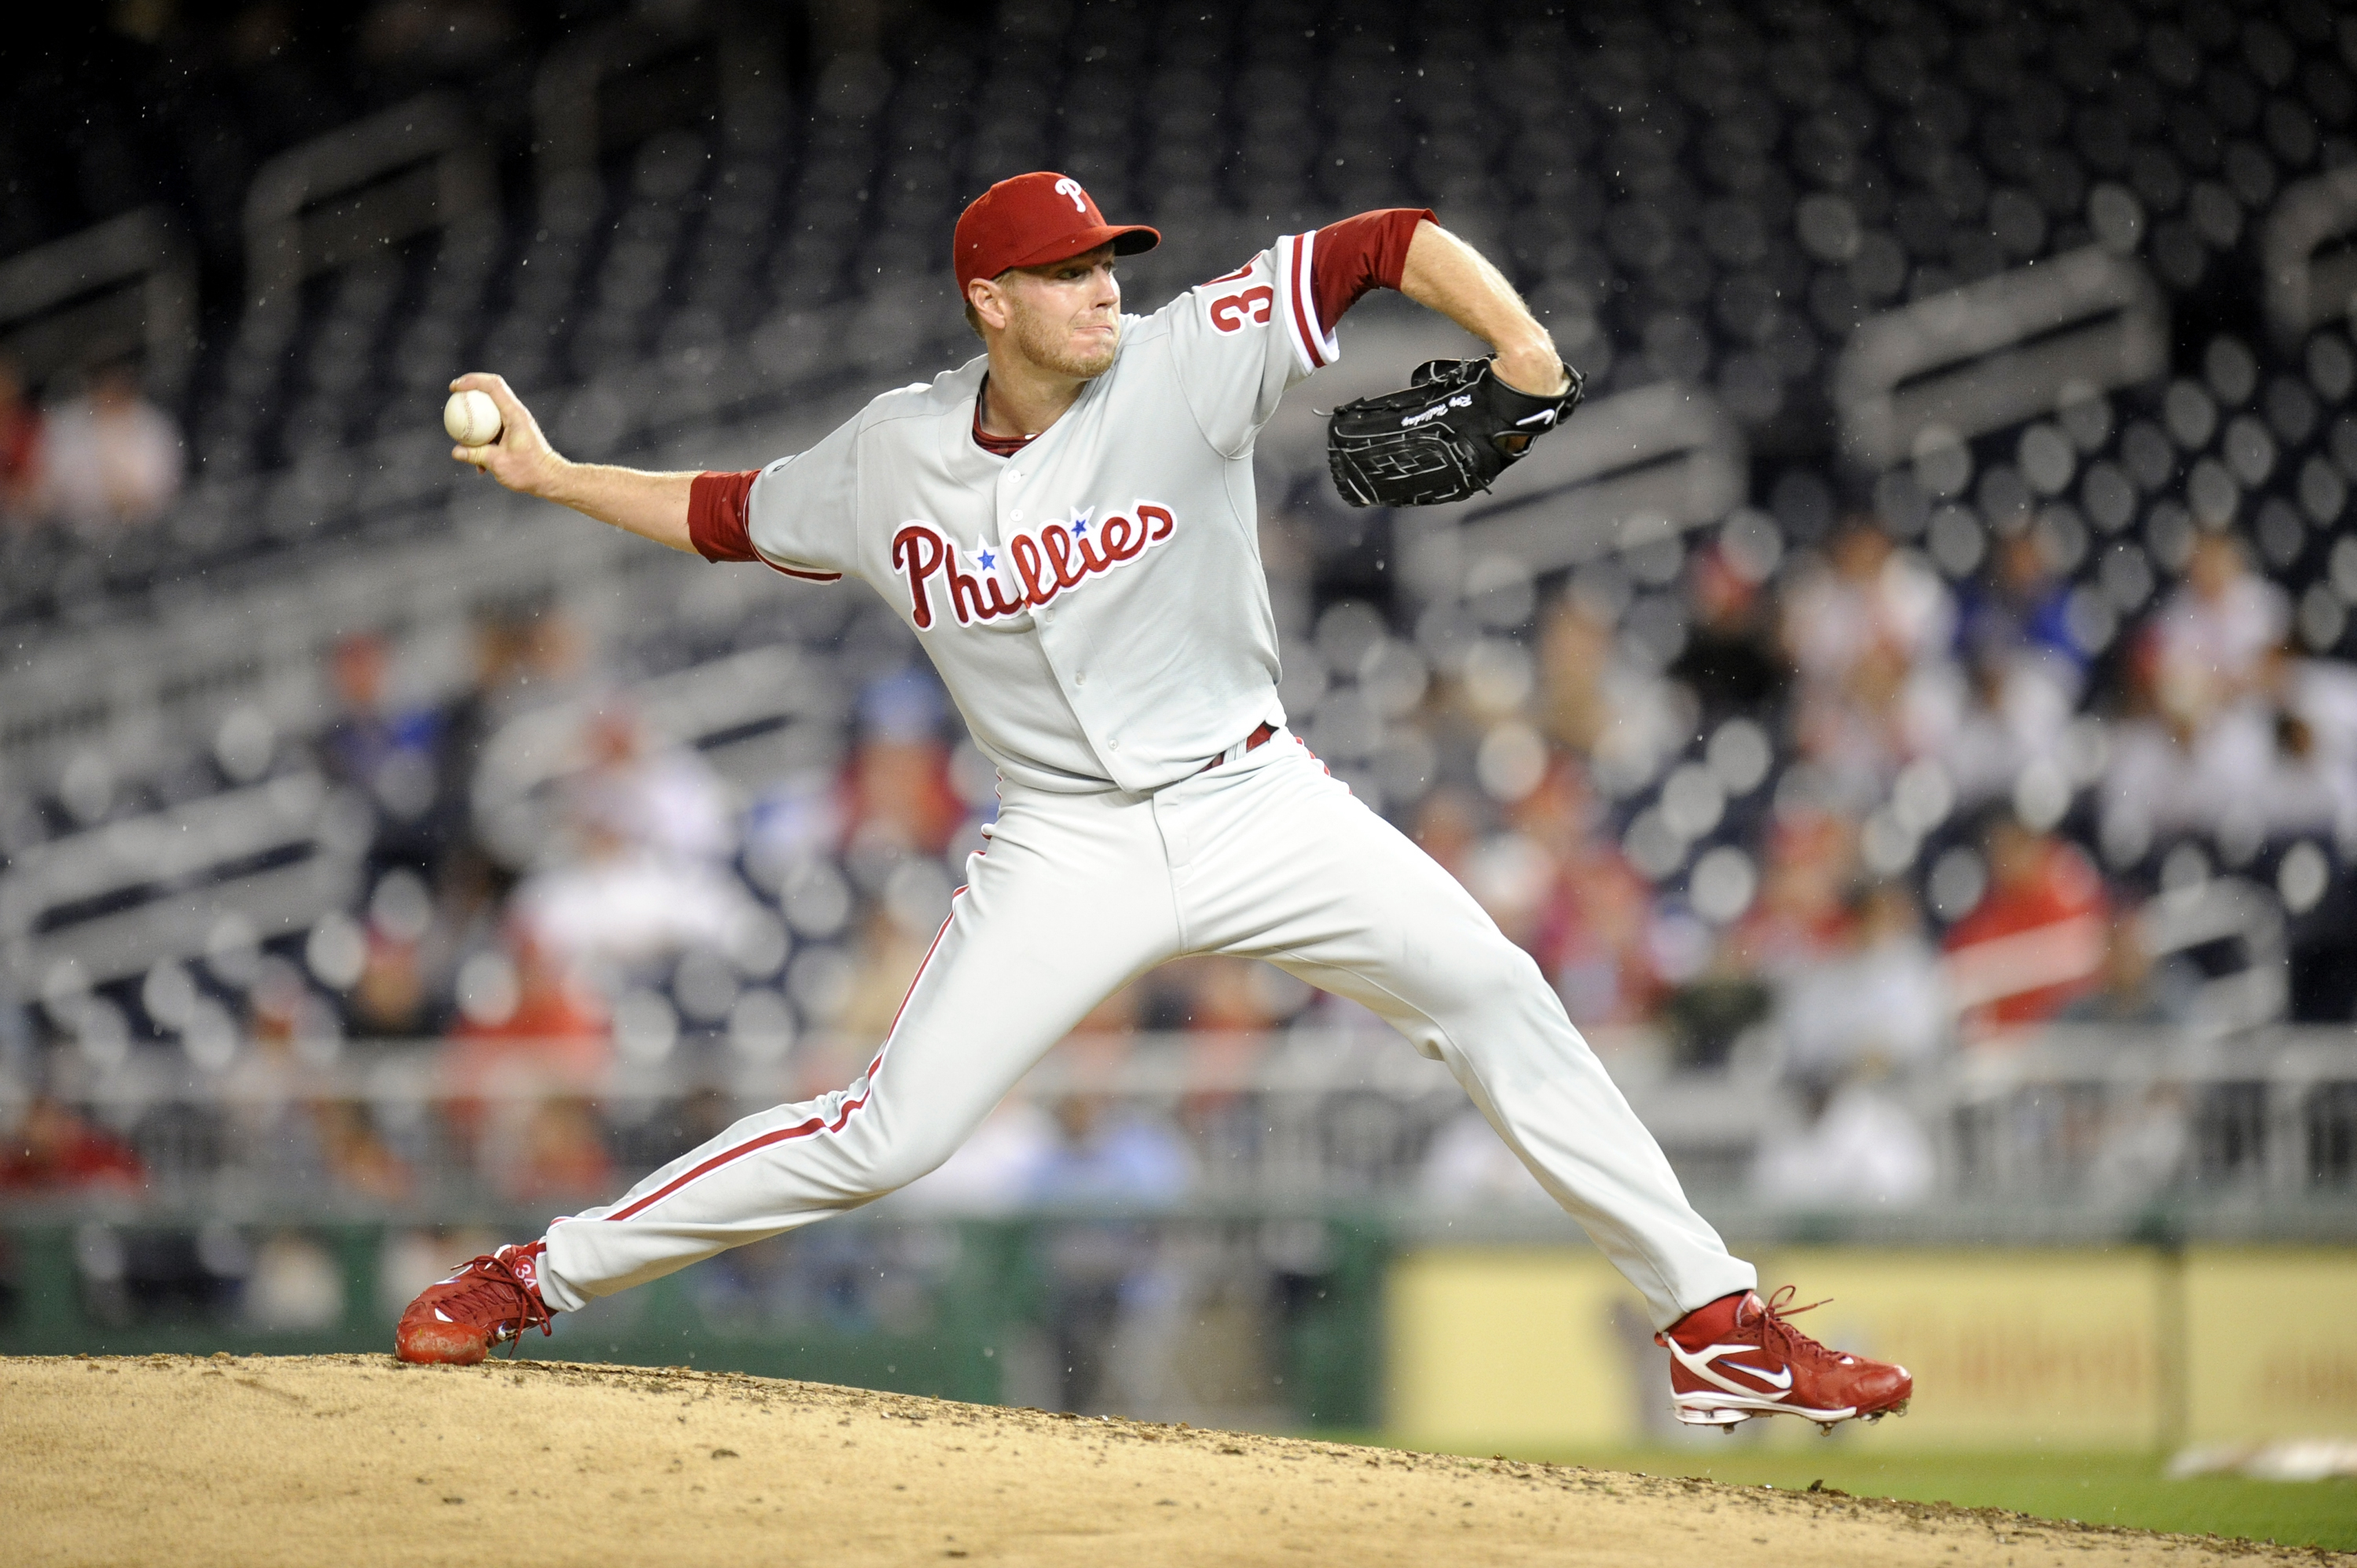 WASHINGTON - SEPTEMBER 27:  Roy Halliday #34 of the Philadelphia Phillies pitches during a baseball game against the Washington Nationals on September 27, 2010 at Nationals Park in Washington, D.C.    (Photo by Mitchell Layton/Getty Images)